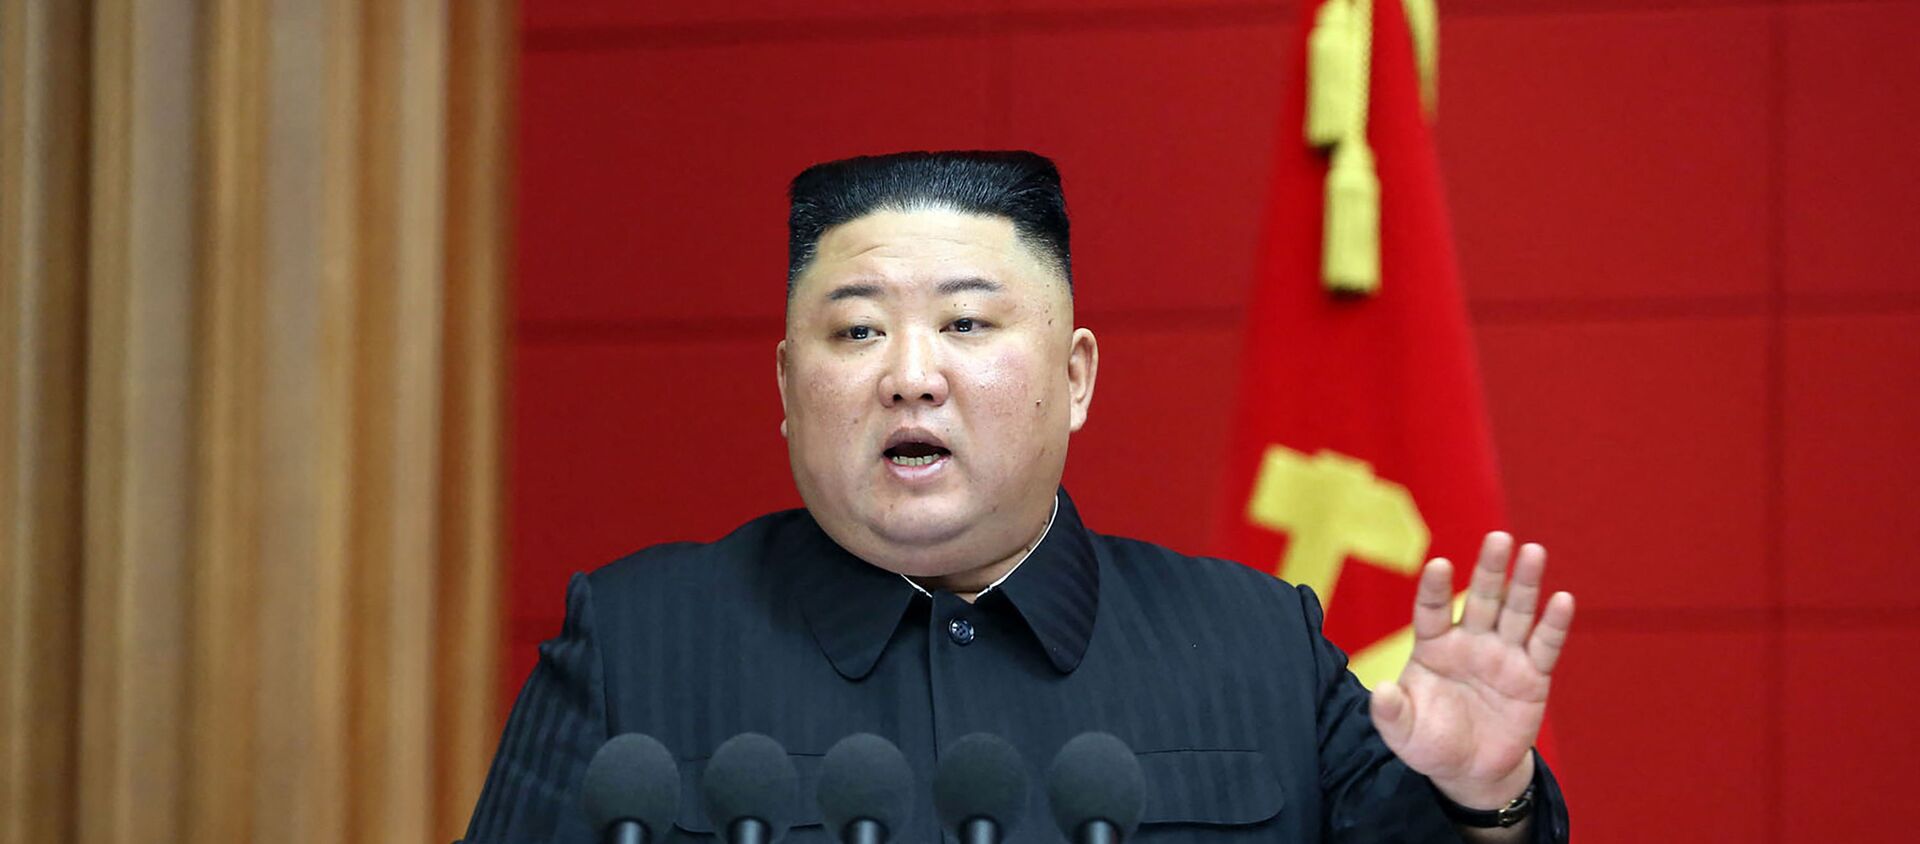 This picture taken on 6 March 2021 and released from North Korea's official Korean Central News Agency (KCNA) on March 7, 2021 shows North Korean leader Kim Jong Un speaking during the First Short Course for Chief Secretaries of City and County Party Committees in Pyongyang. - Sputnik International, 1920, 09.07.2021